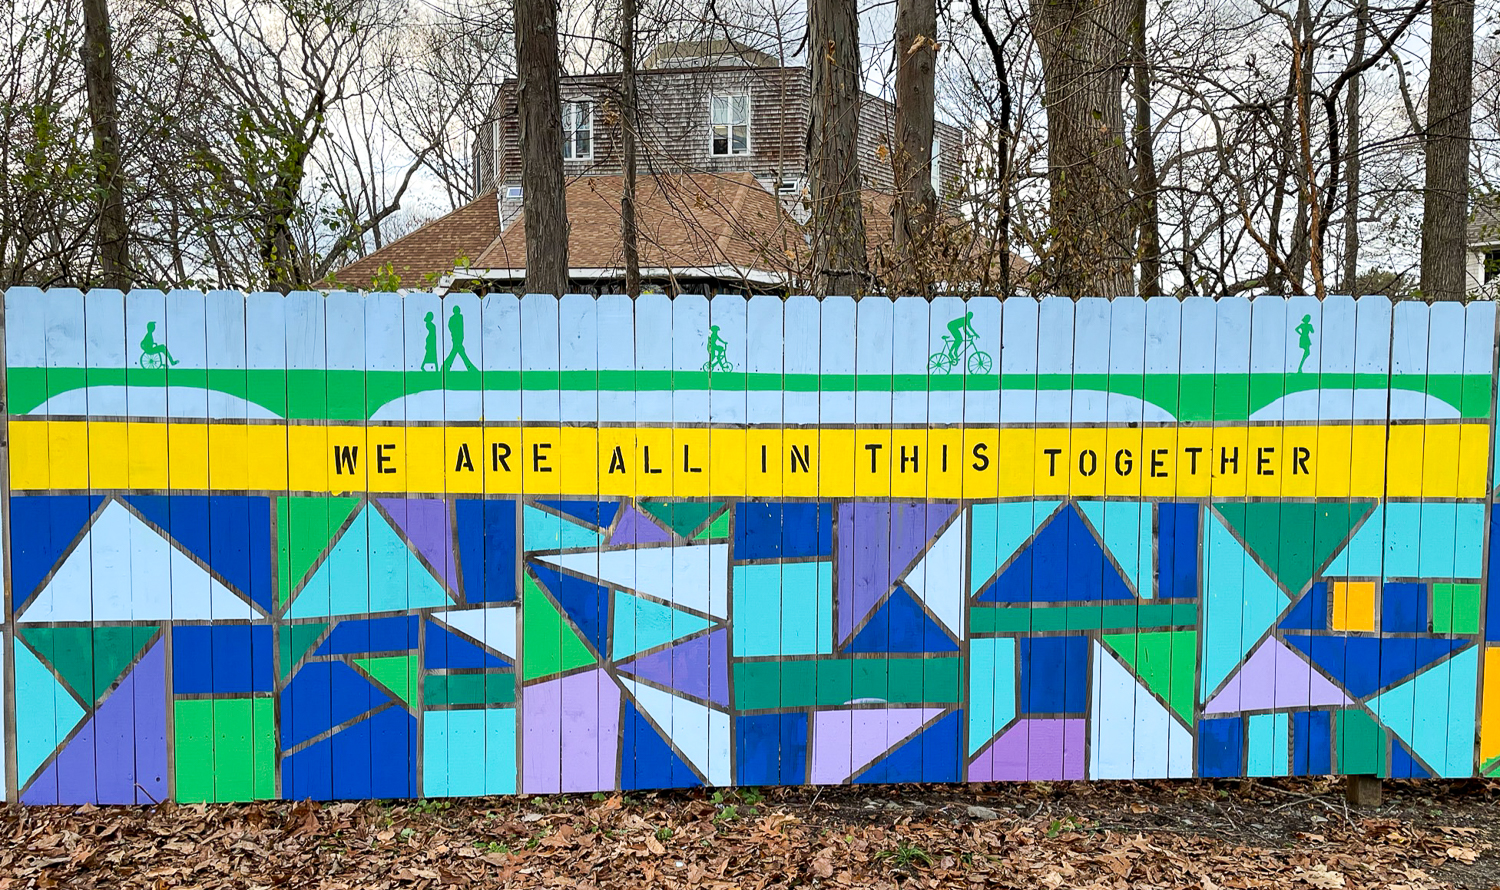 Panel of mural on a fence that reads "We are all in this together."